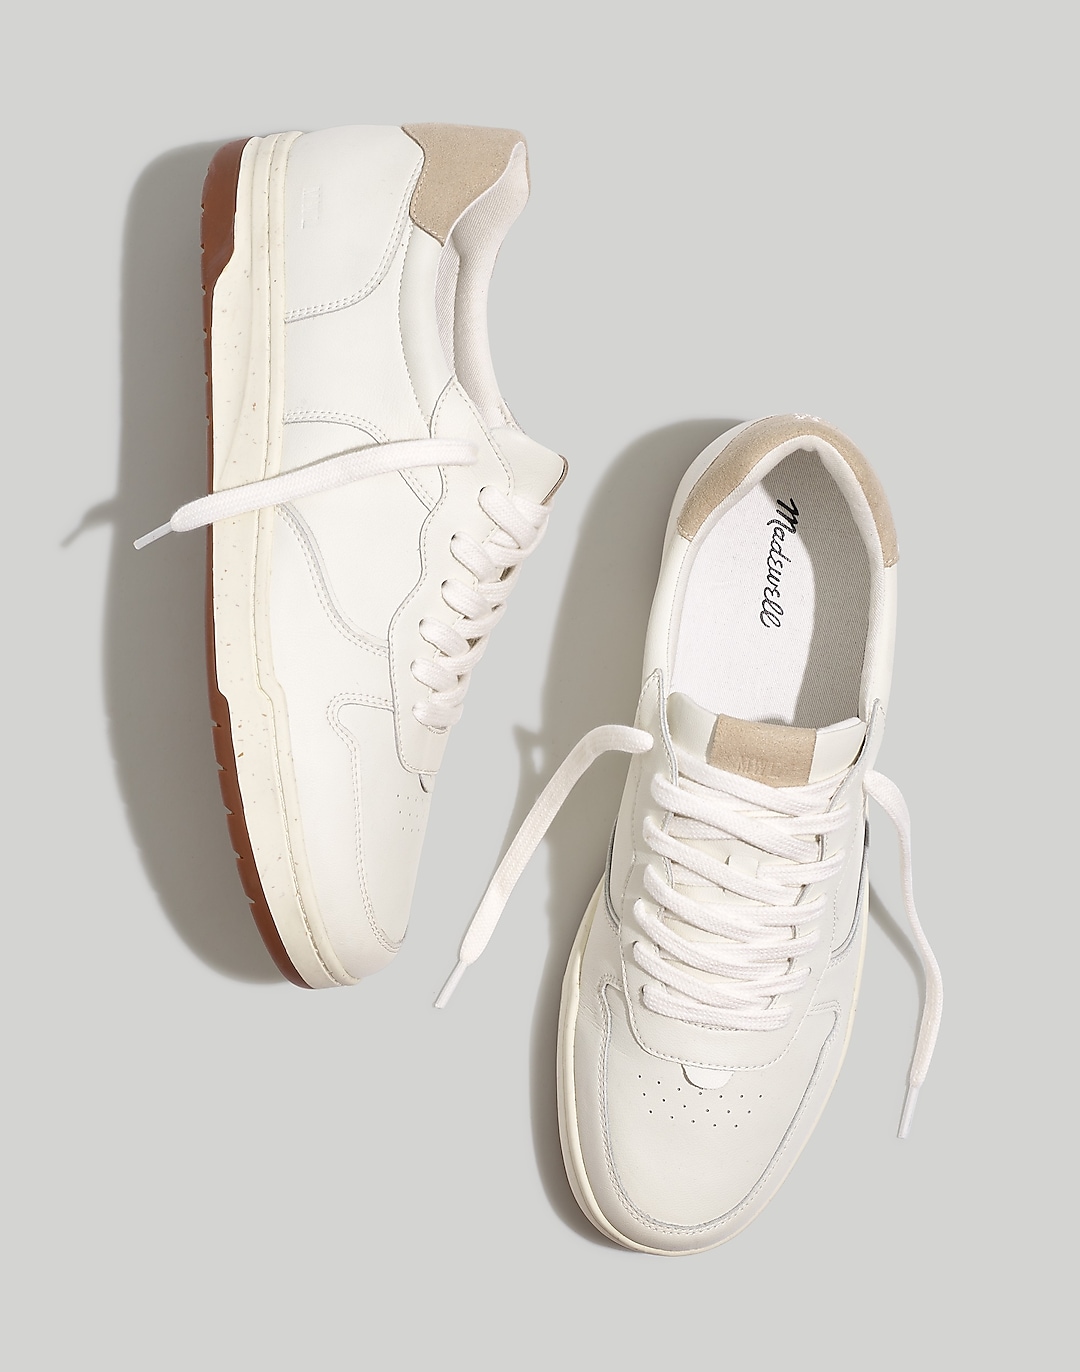 Court Sneakers in Colorblock Leather and Suede | Madewell